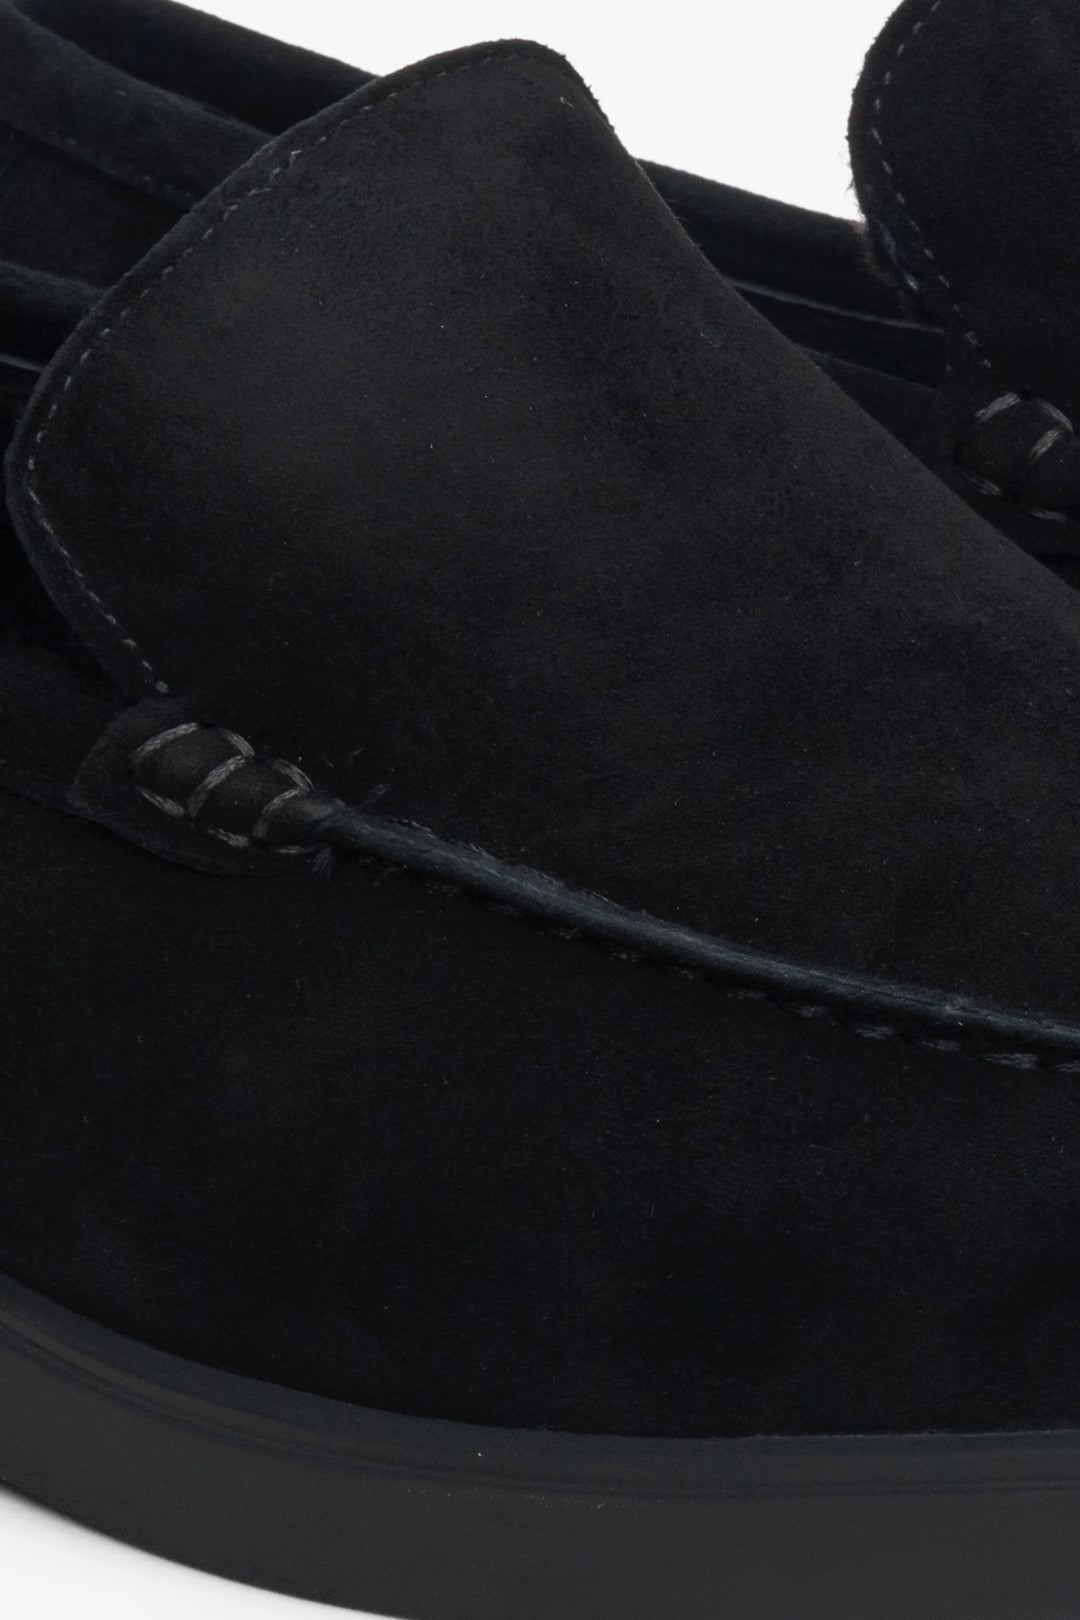 Men's moccasins made of genuine velour by Estro - close-up on the details.